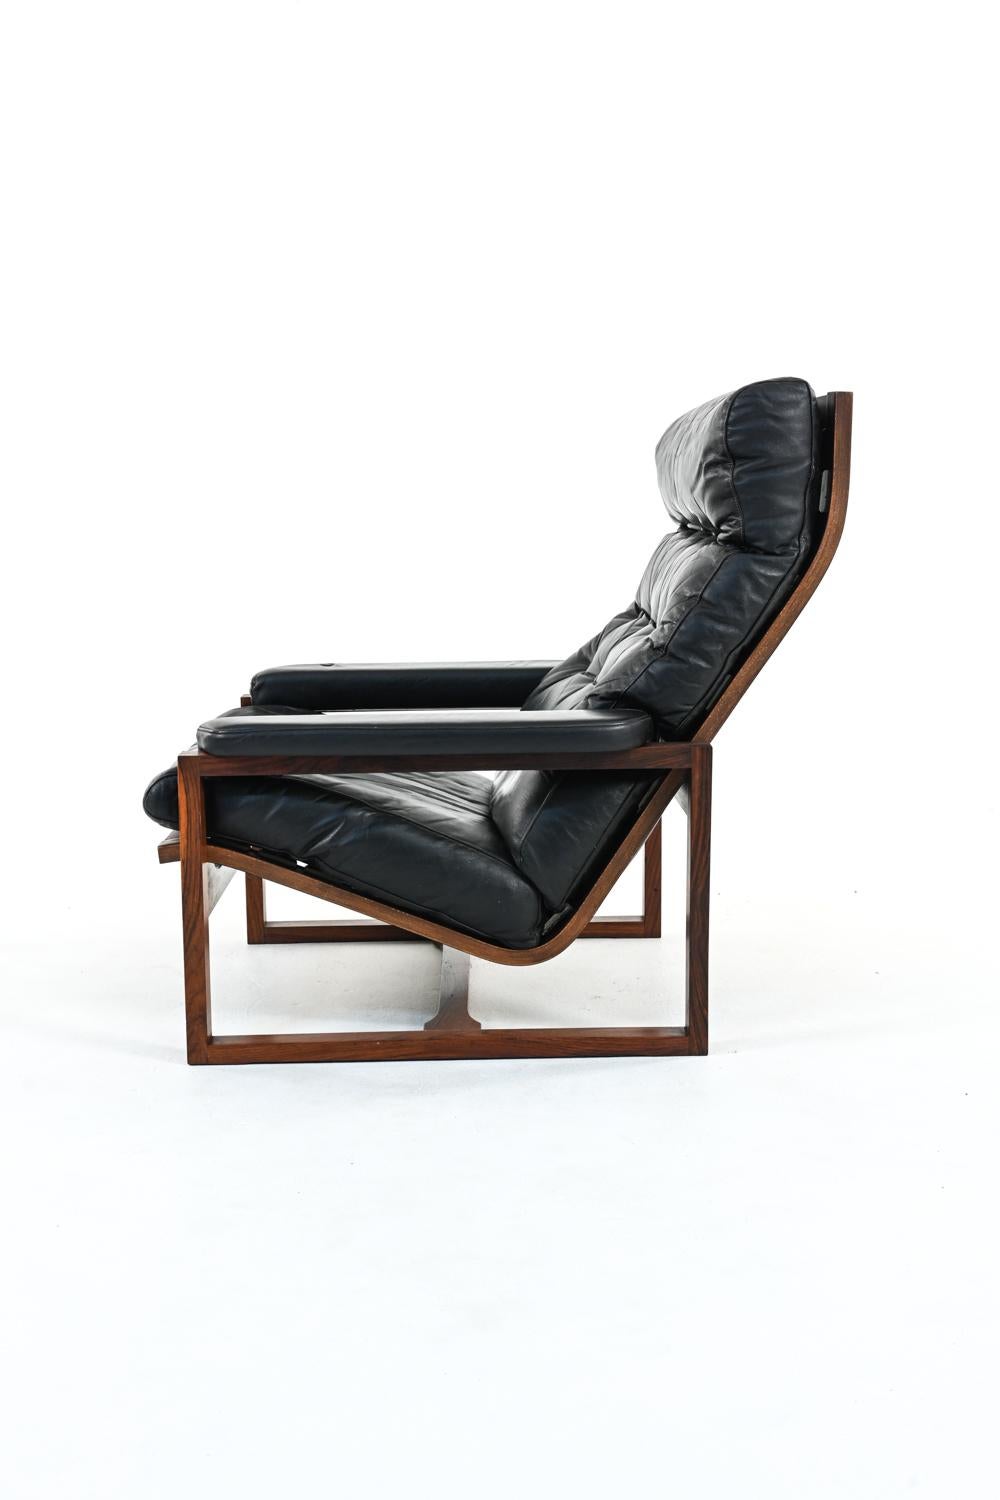 European Danish Rosewood & Leather Lounge Chair in the Manner of Percival Lafer, c. 1980 For Sale